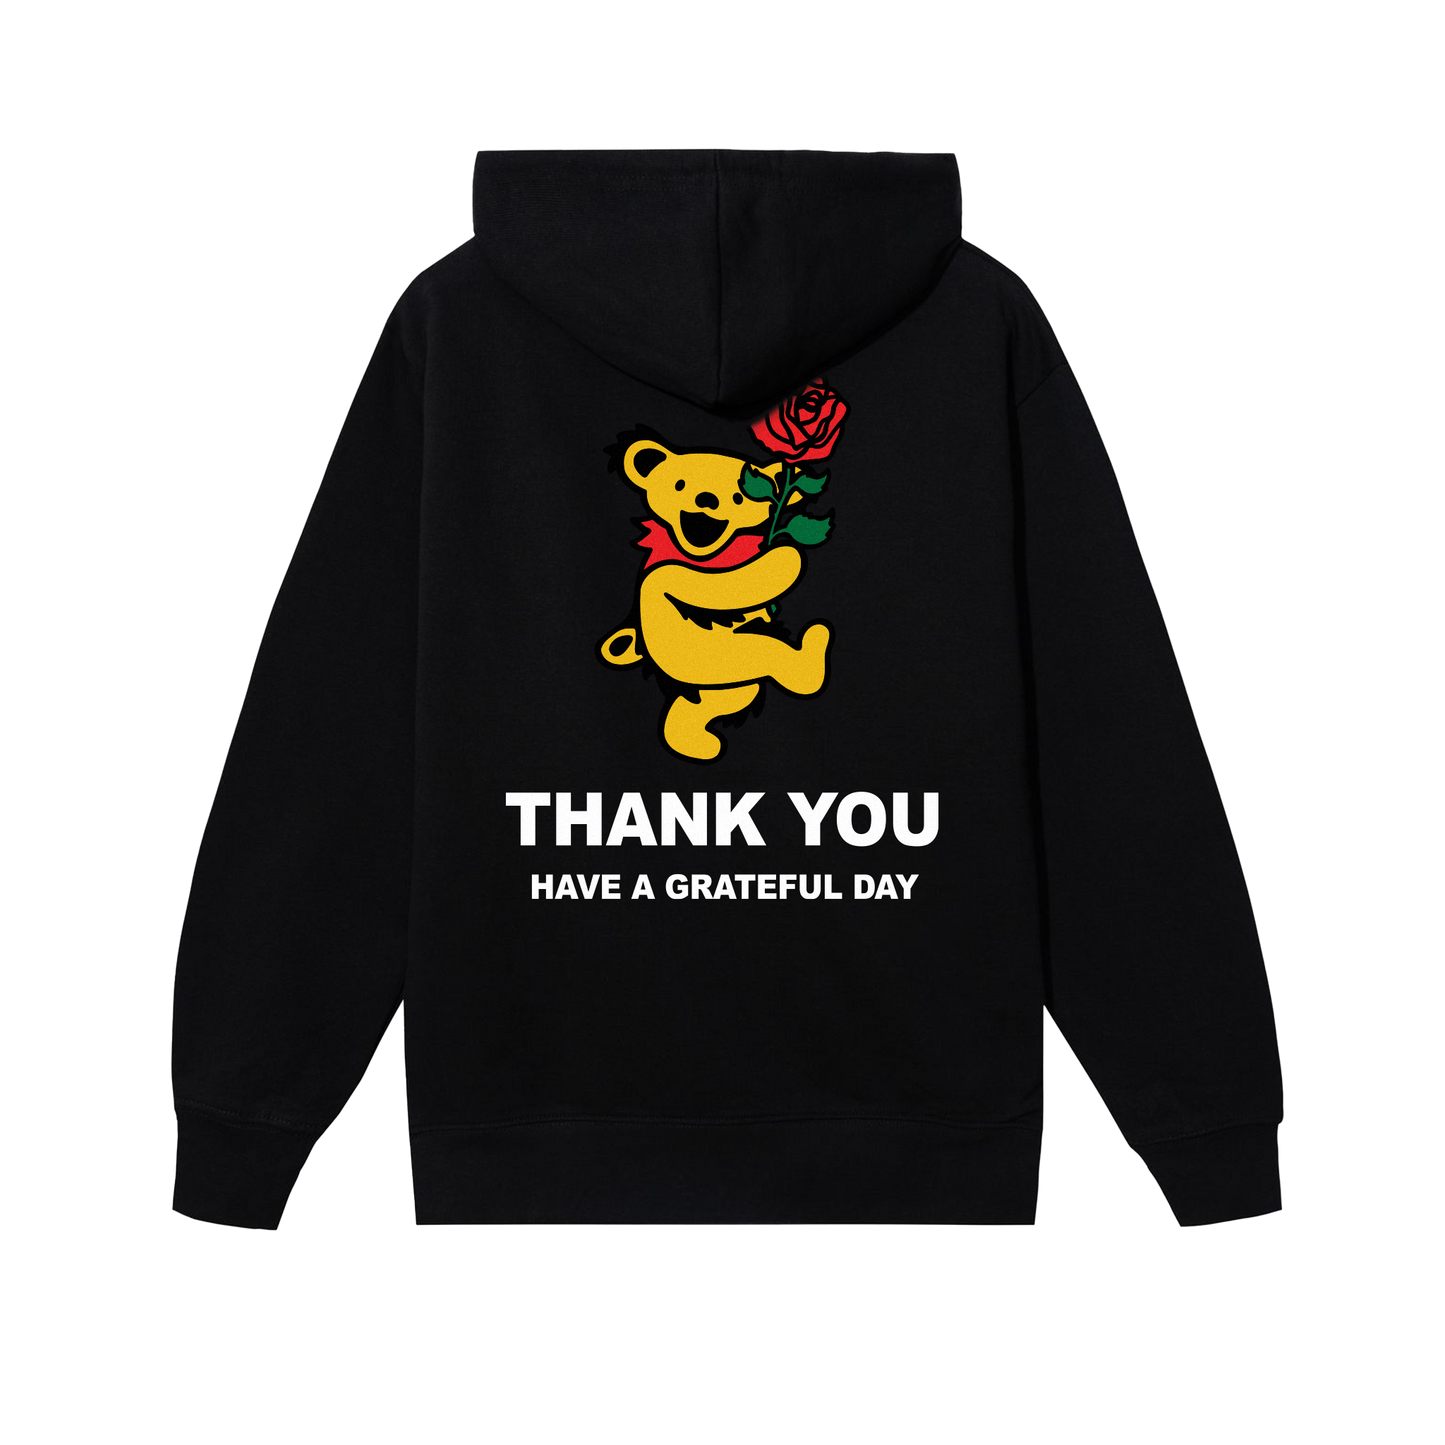 MARKET clothing brand HAVE A GRATEFUL DAY HOODIE. Find more graphic tees, hats and more at MarketStudios.com. Formally Chinatown Market.